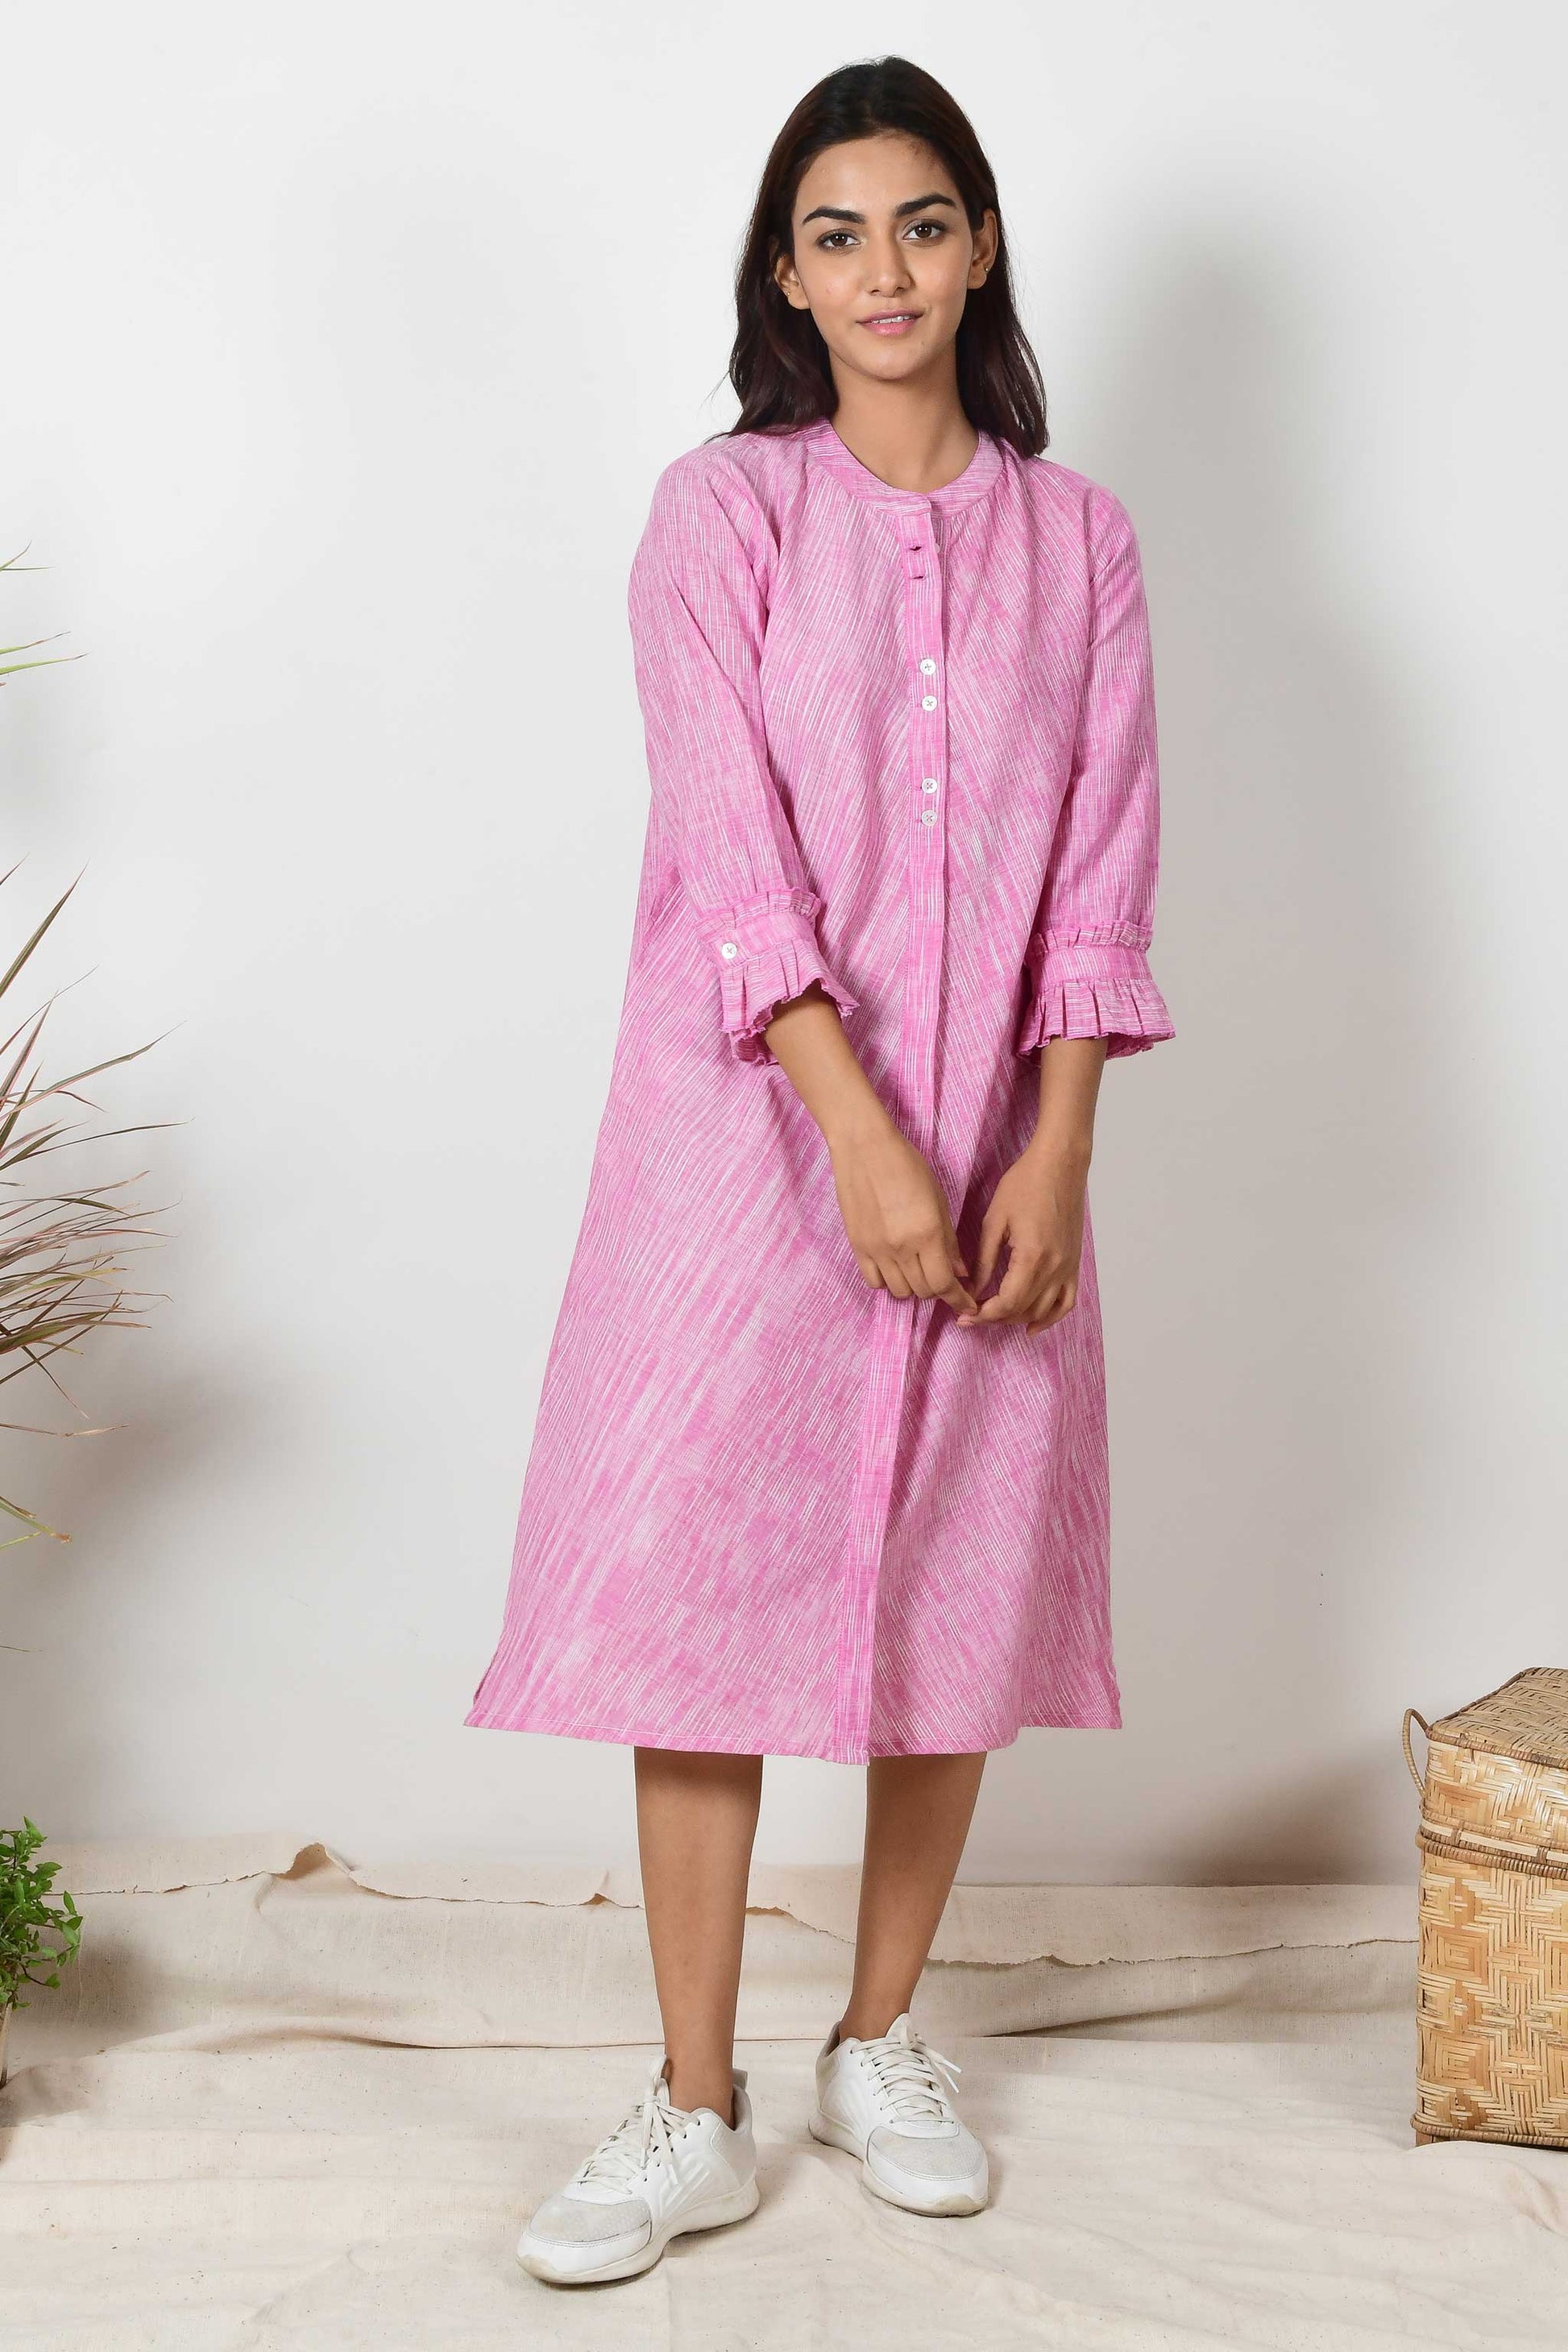 Indian Model wearing an Indian shirt dress of hand spun and handloom cotton in pink colour.